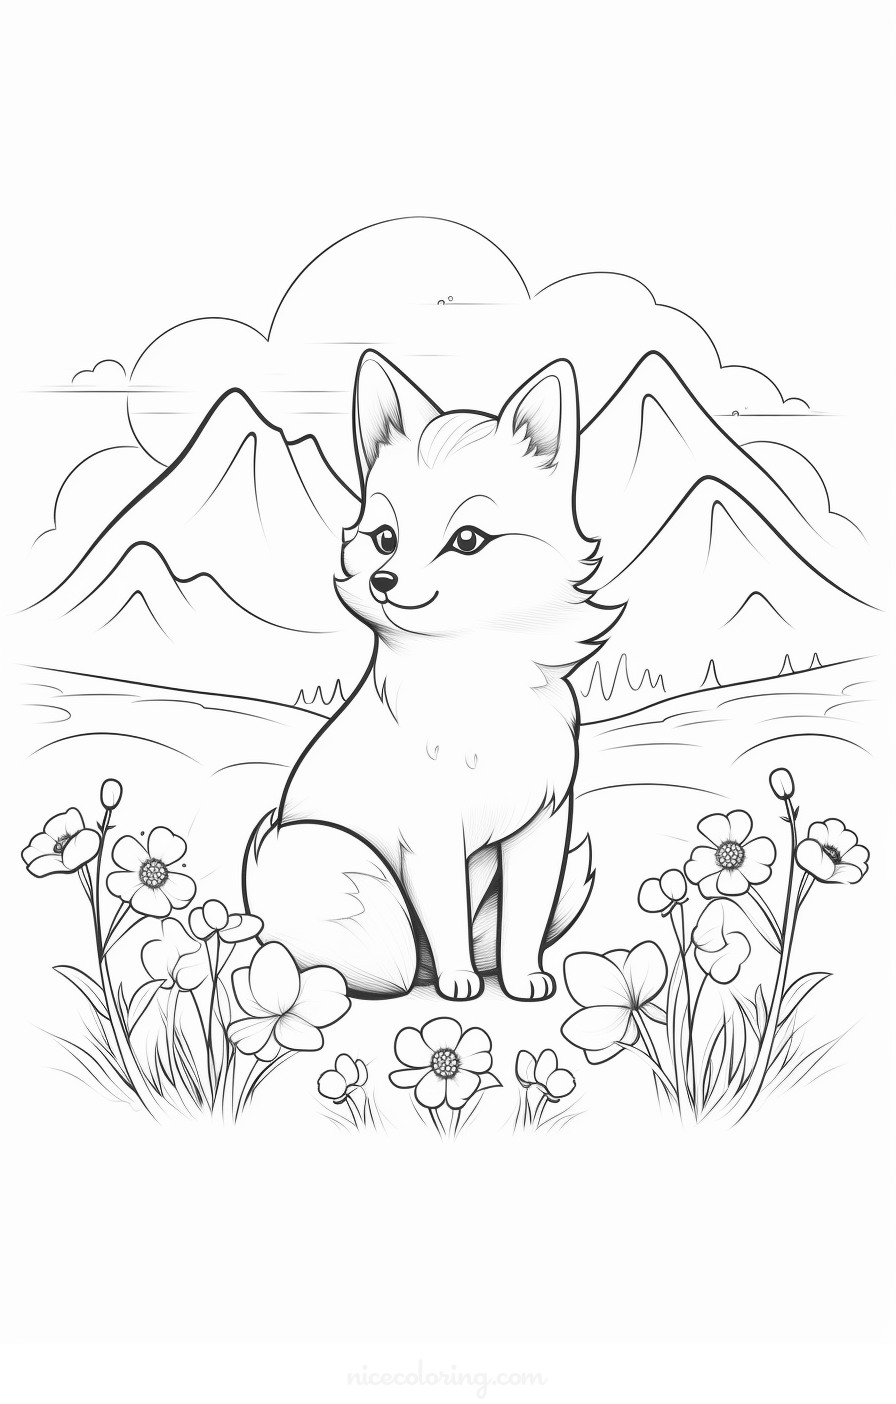 Wolf in a forest scene coloring page